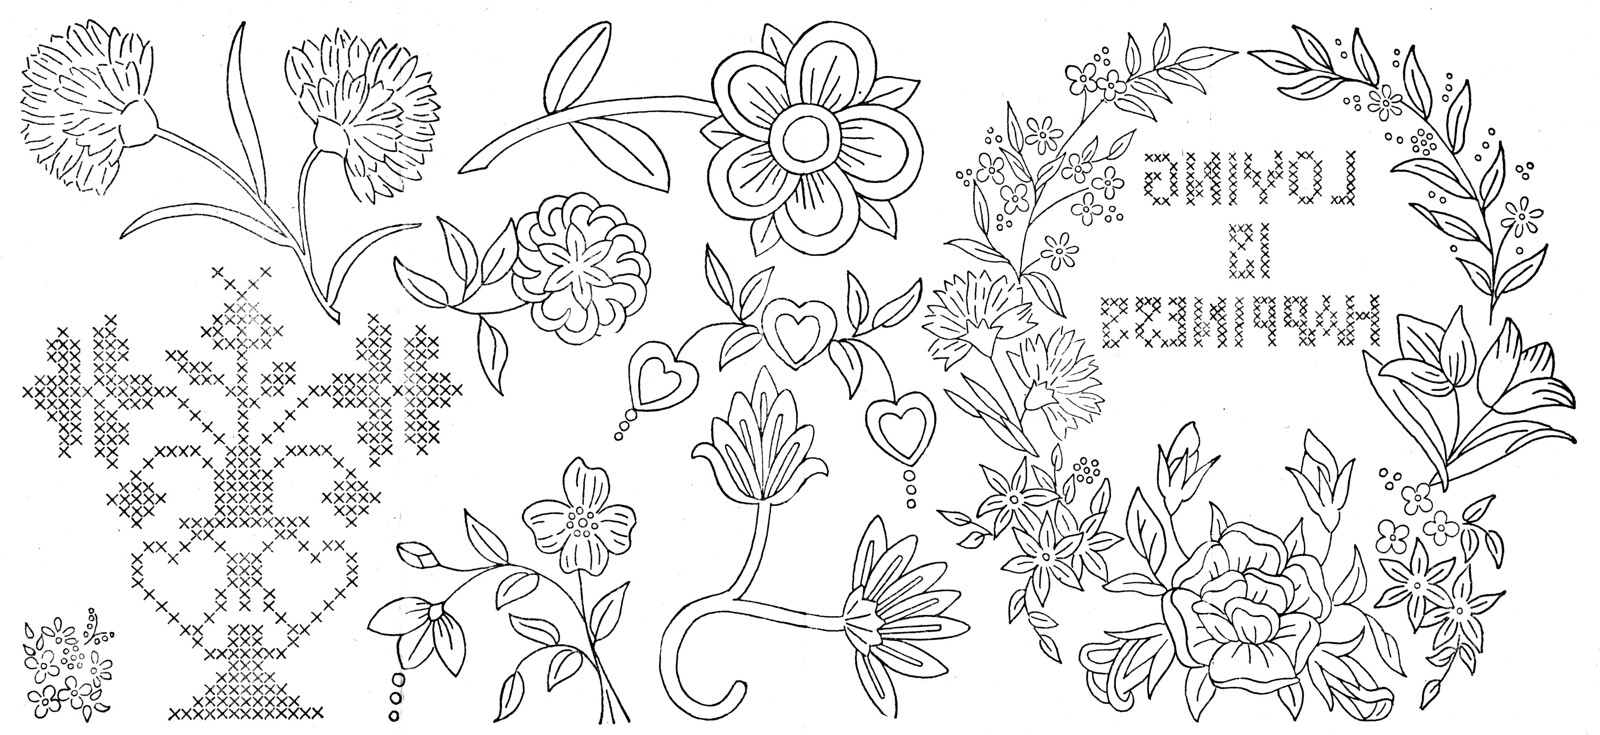 Vintage Embroidery Transfers, Floral themes. From an unmark…